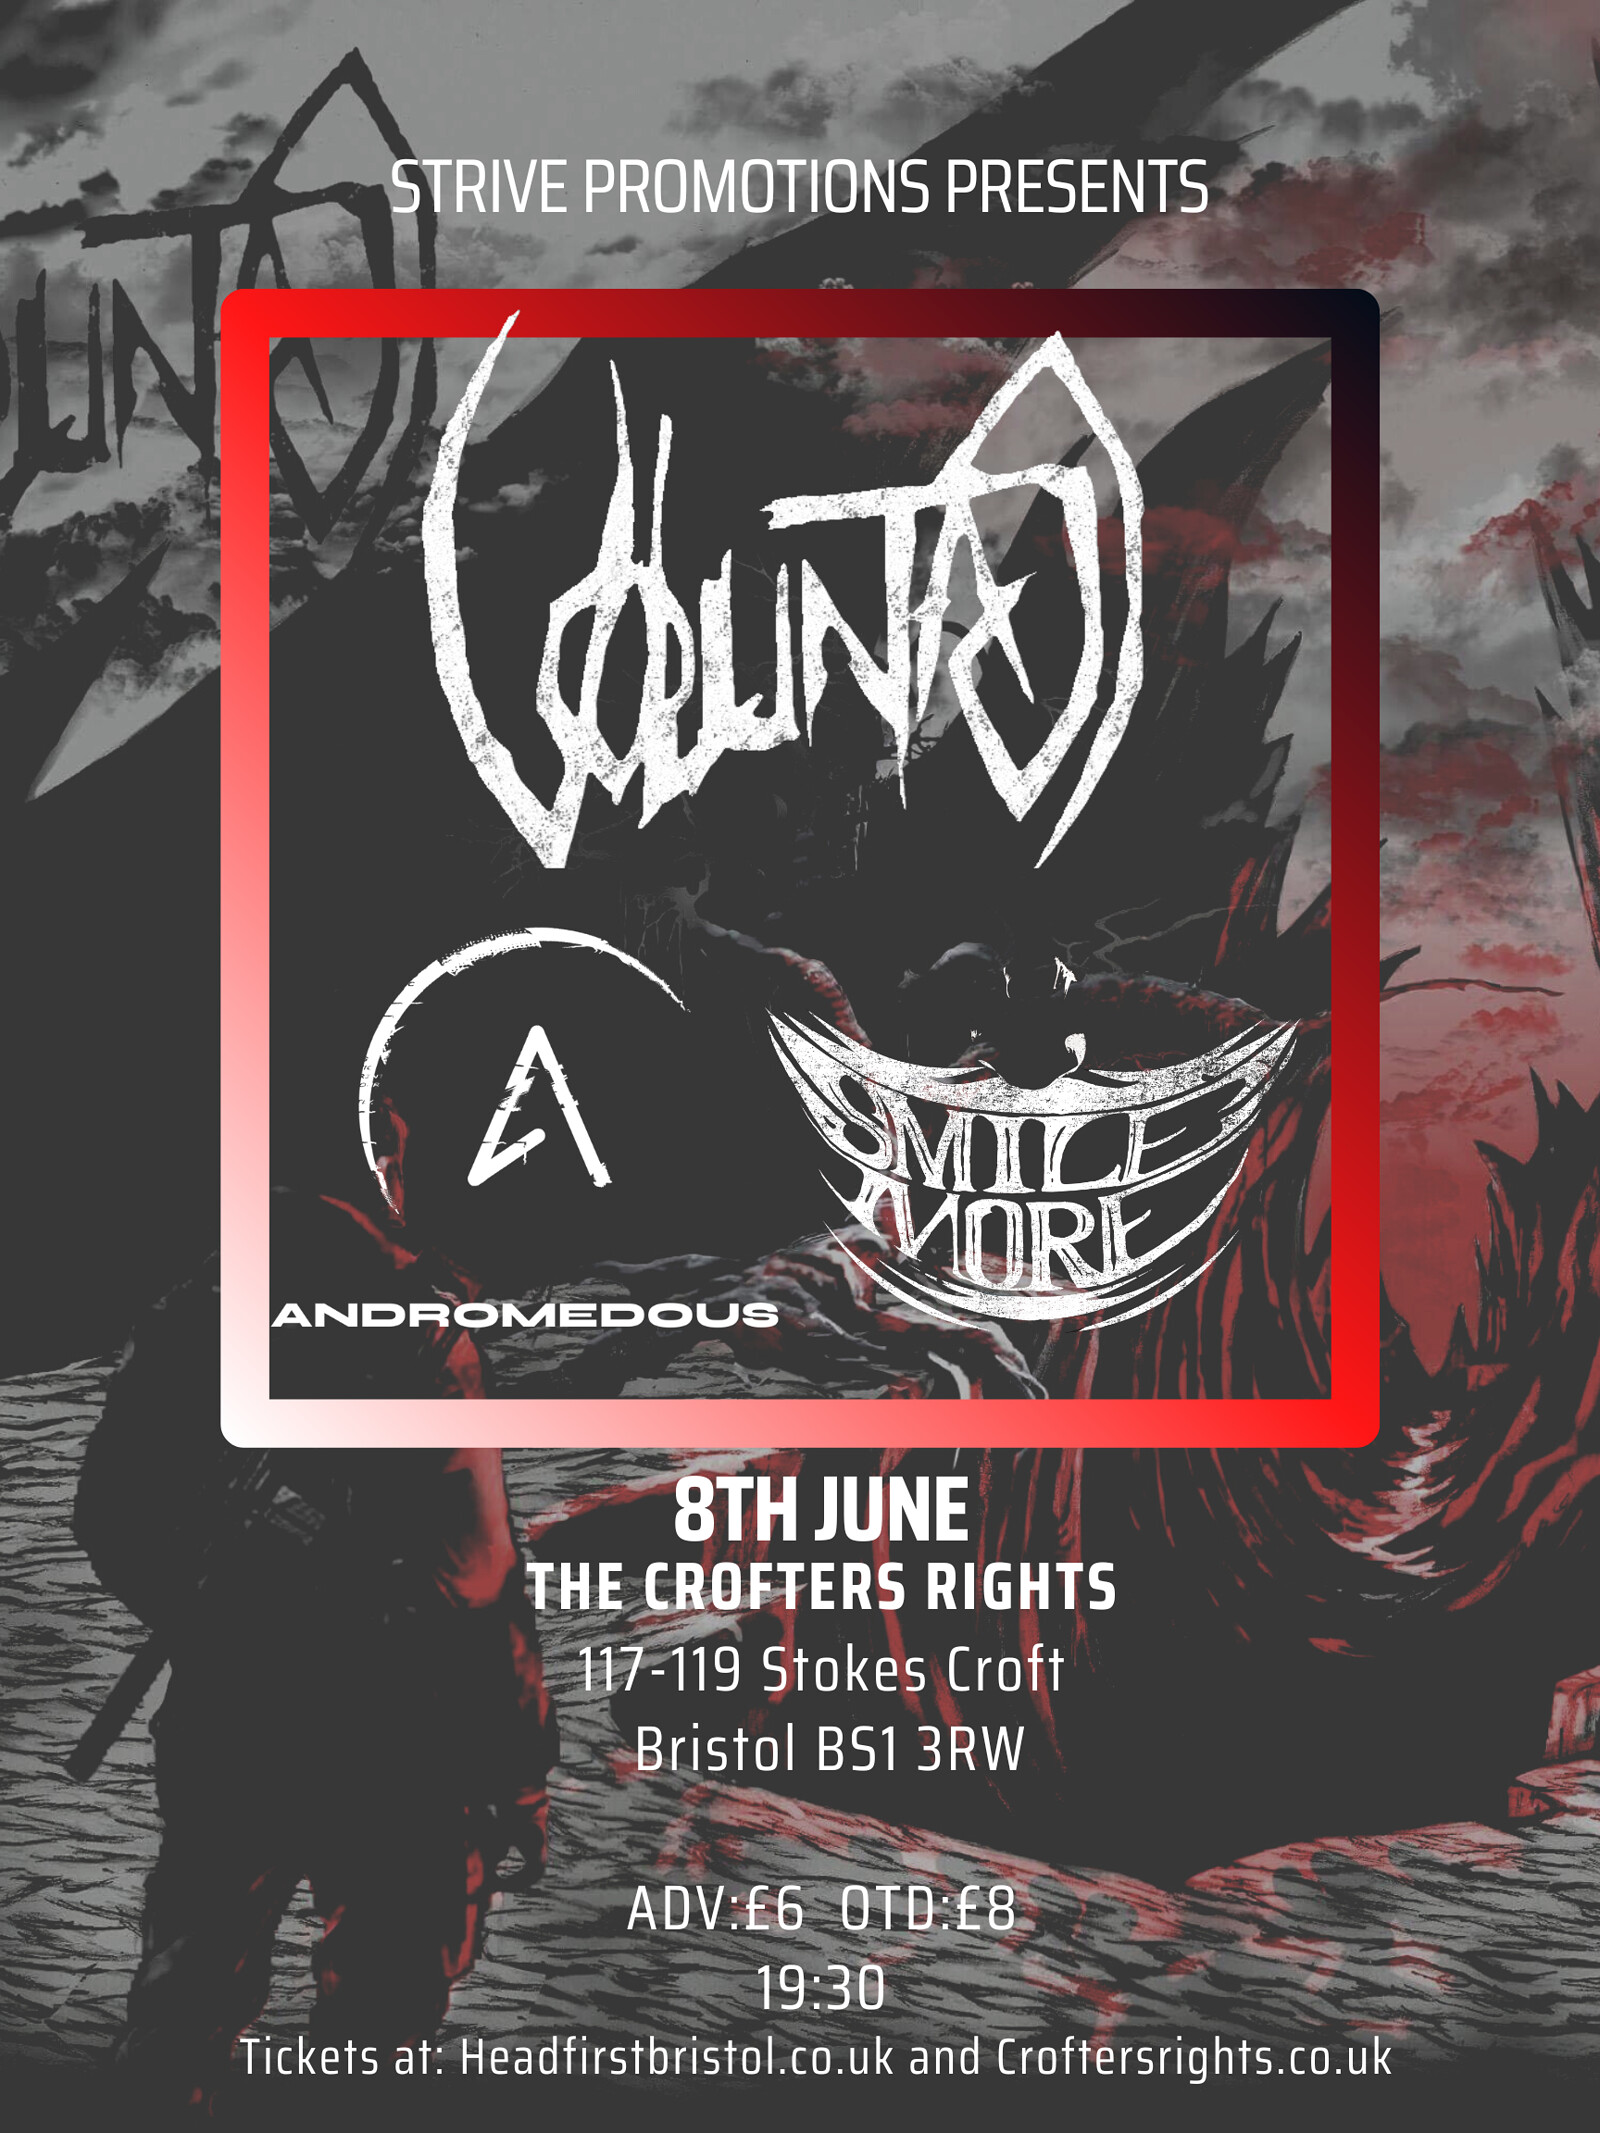 Strive Promotions-Voluntas, Andromedous, SmileMore at Crofters Rights